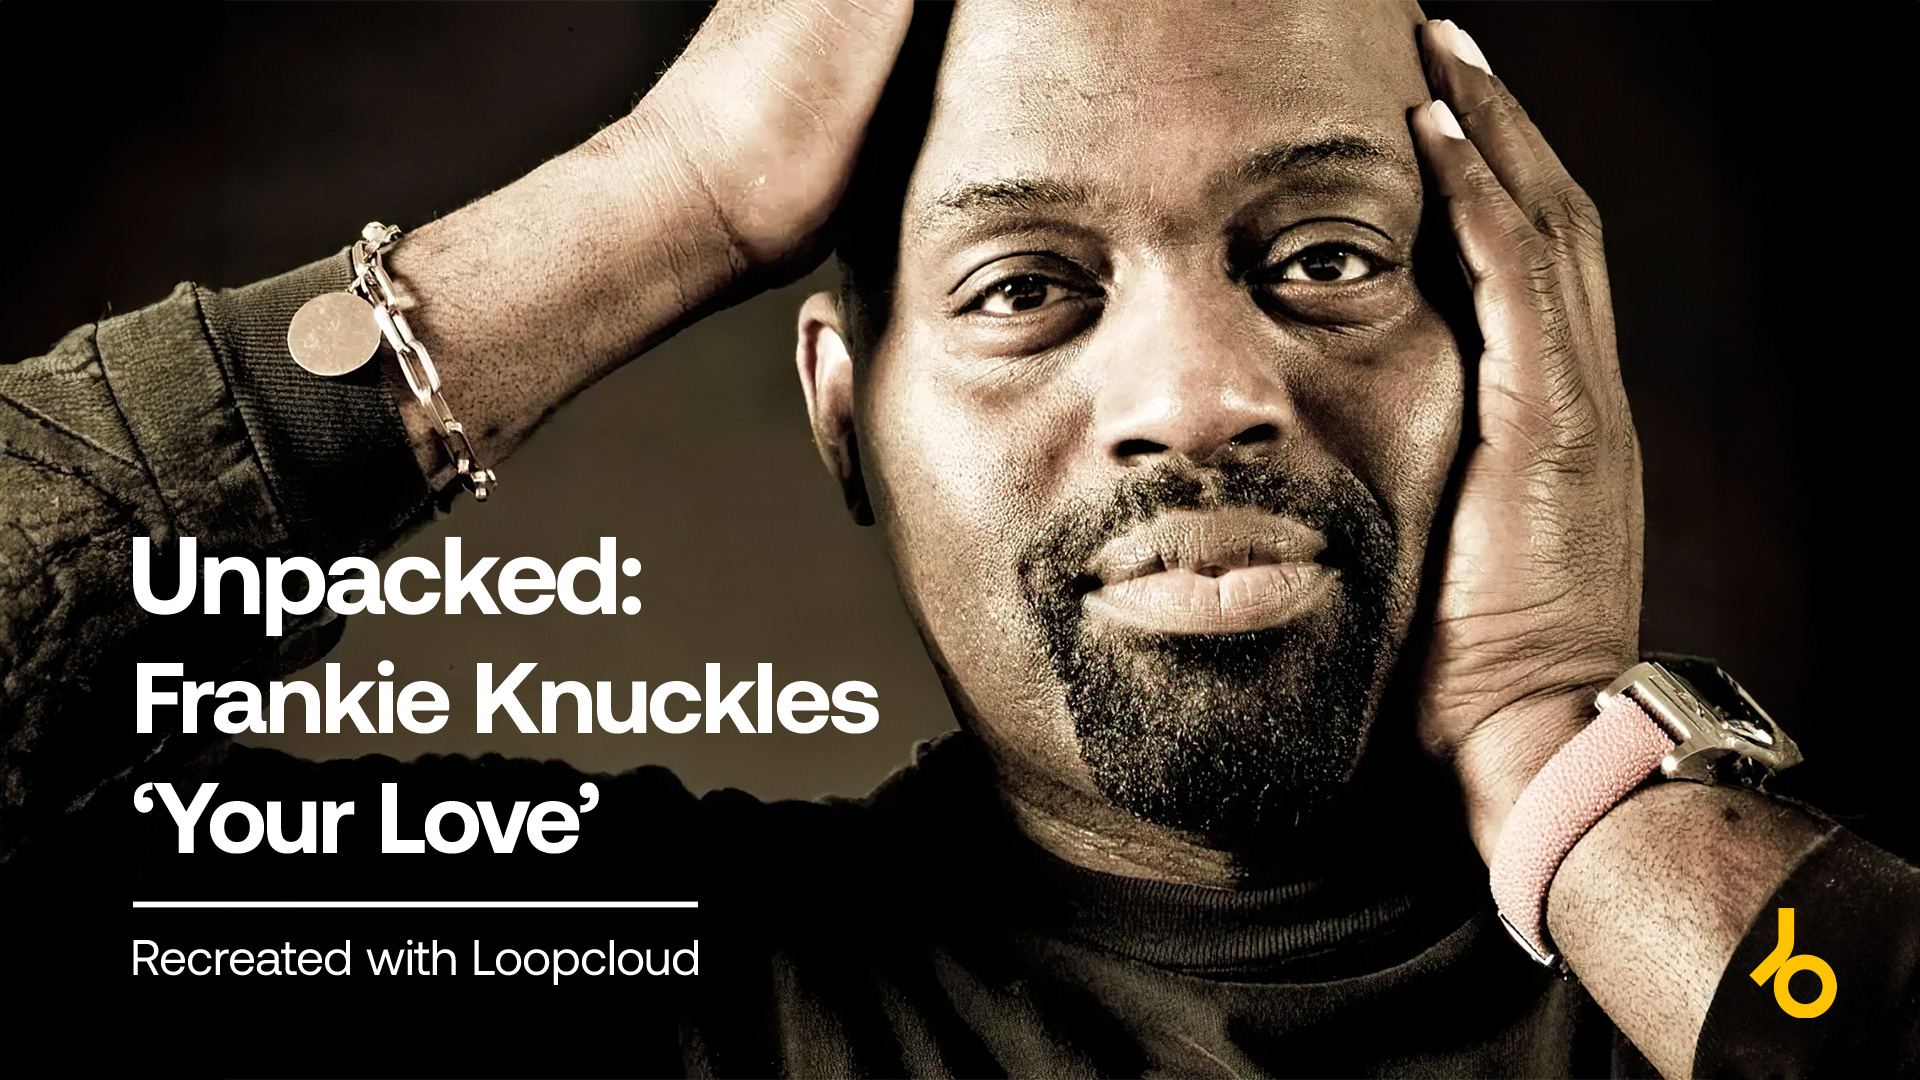 Unpacked frankie knuckles your love 1920x1080